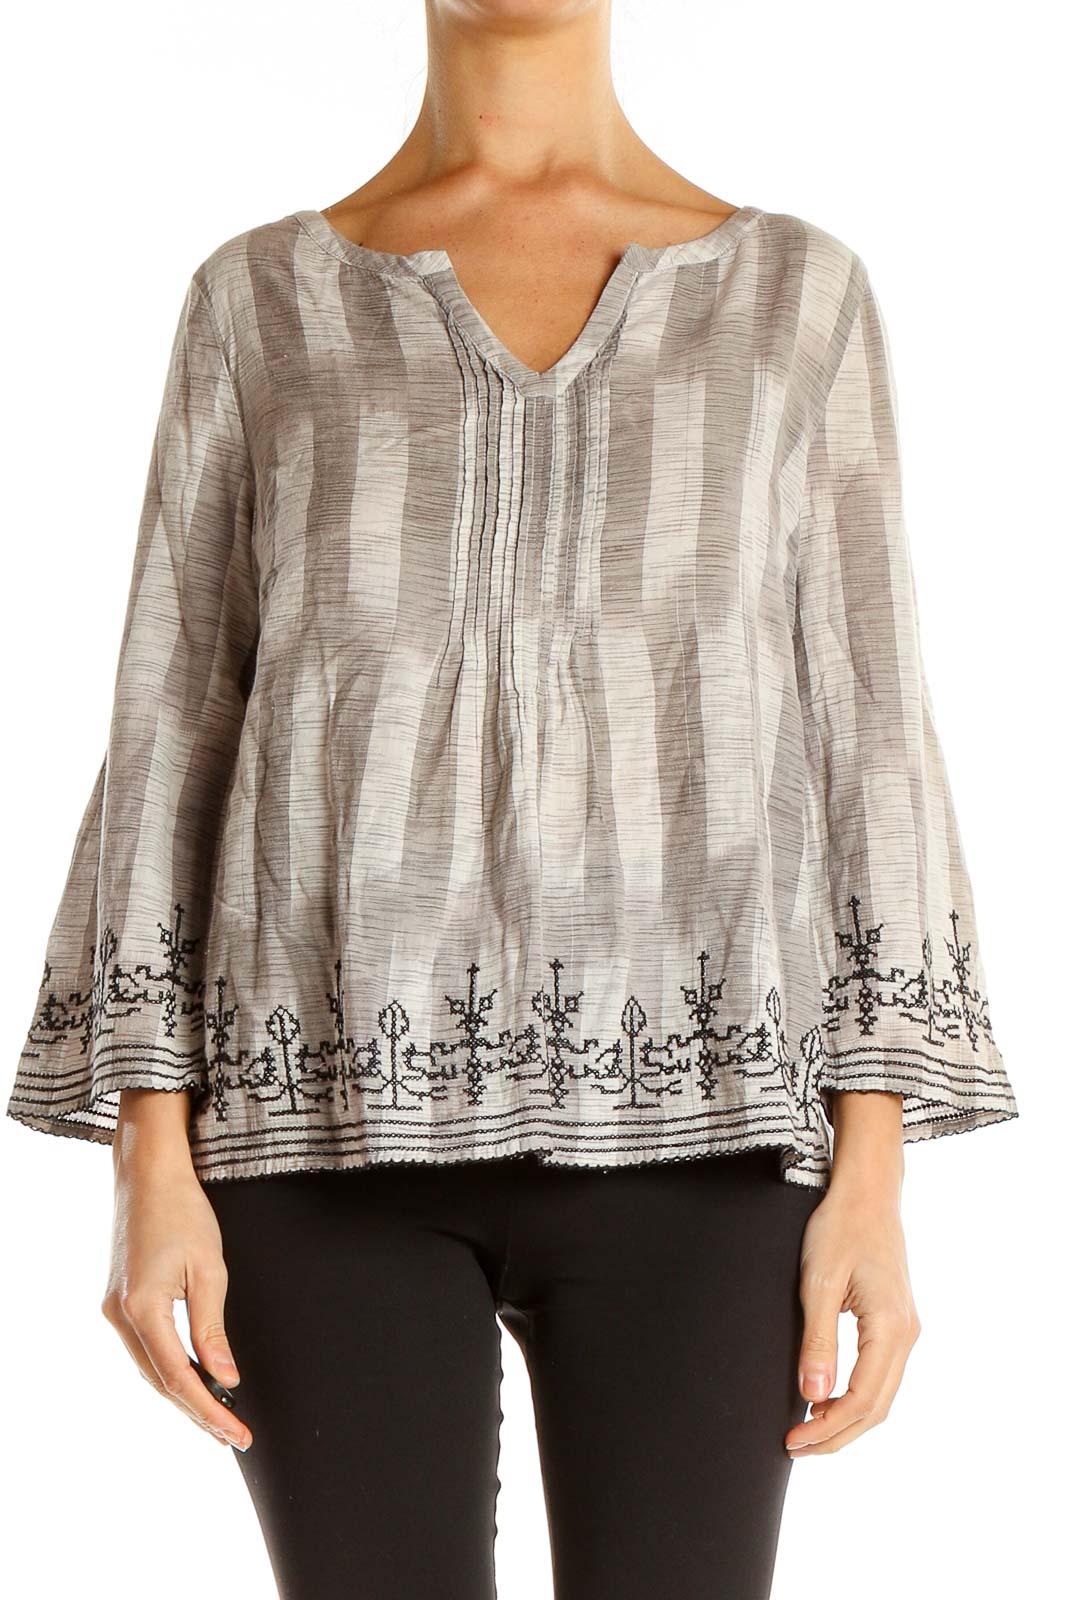 Beige Gray Textured Brunch Blouse with Embroider Trim Front